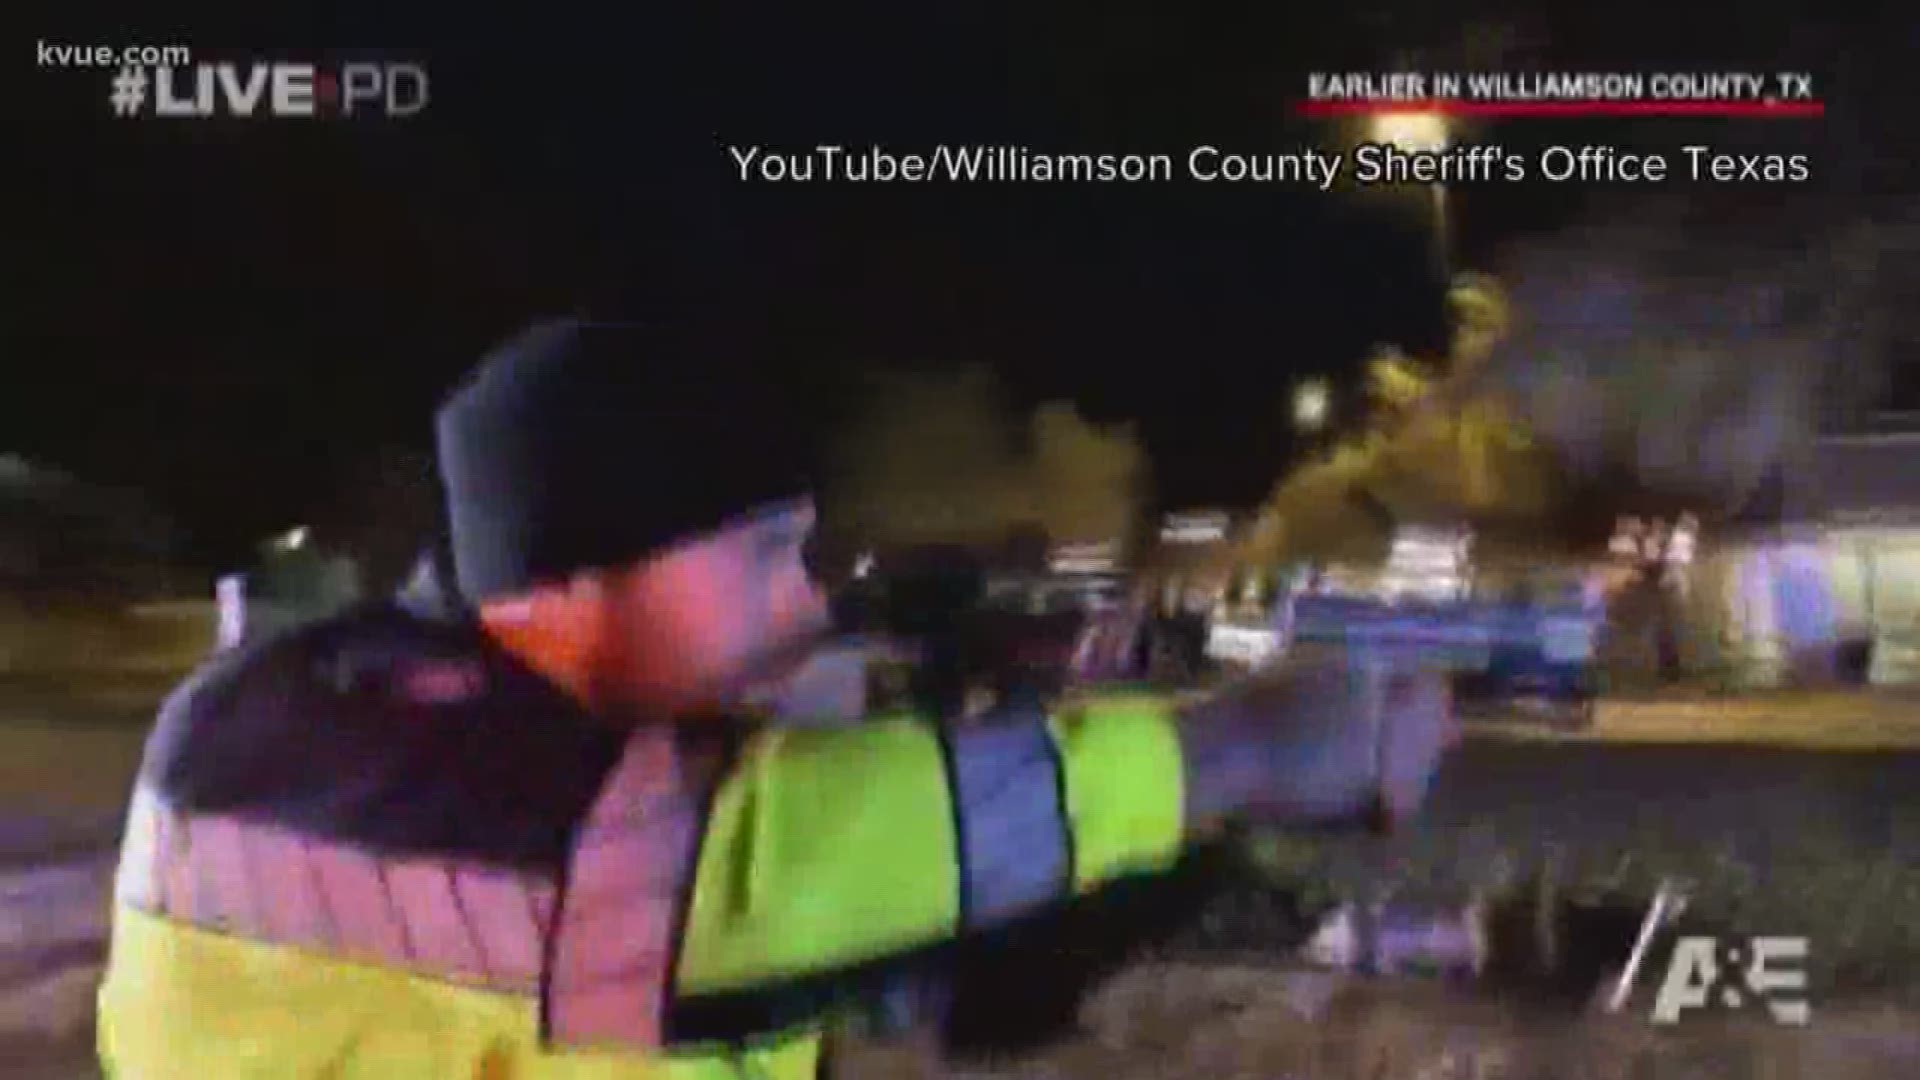 Three months after renewing a contract with "Live PD," Williamson County commissioners are considering pulling the plug on the show.